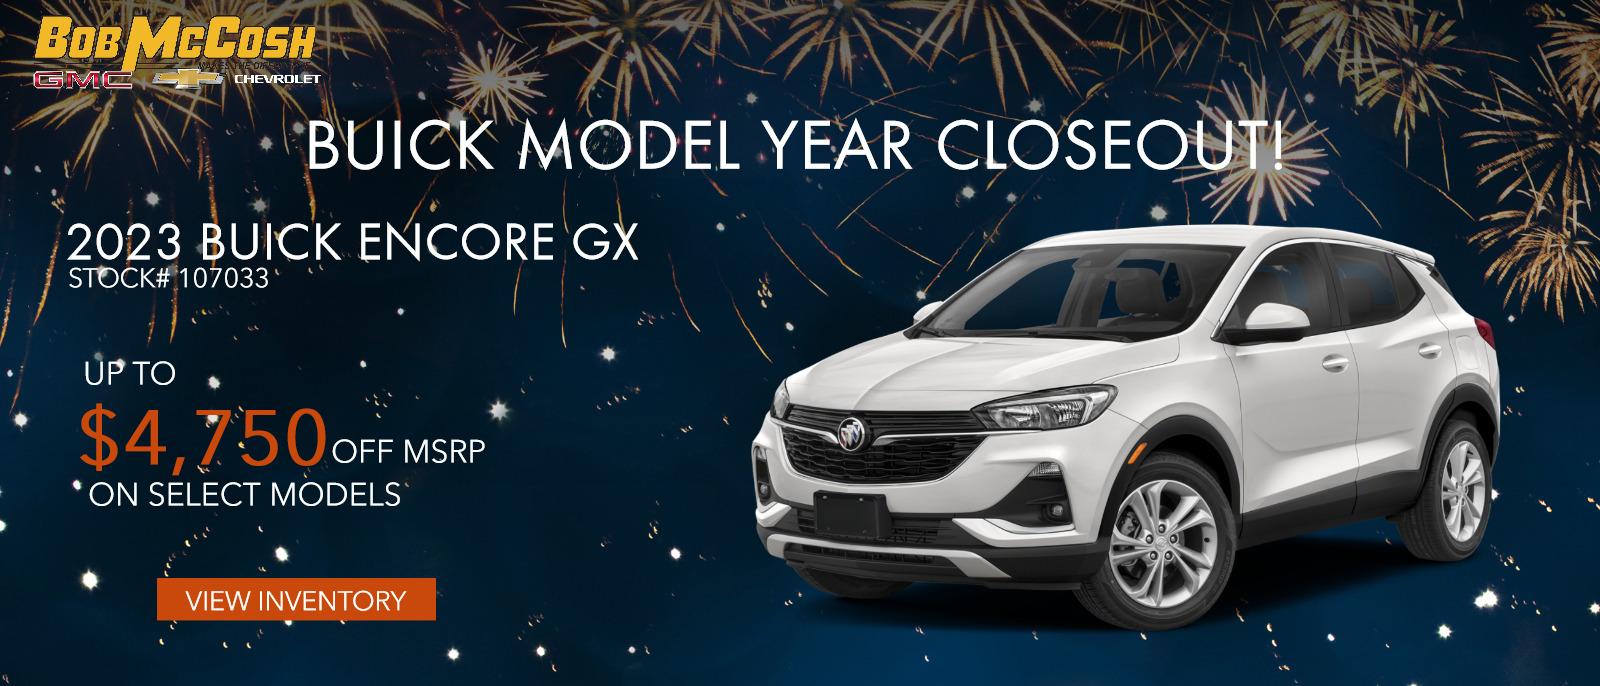 Buick Model Year Closeout!

2023 Buick Encore GX - Up to $4750 OFF MSRP
ON SELECT MODELS
Stock# 107033